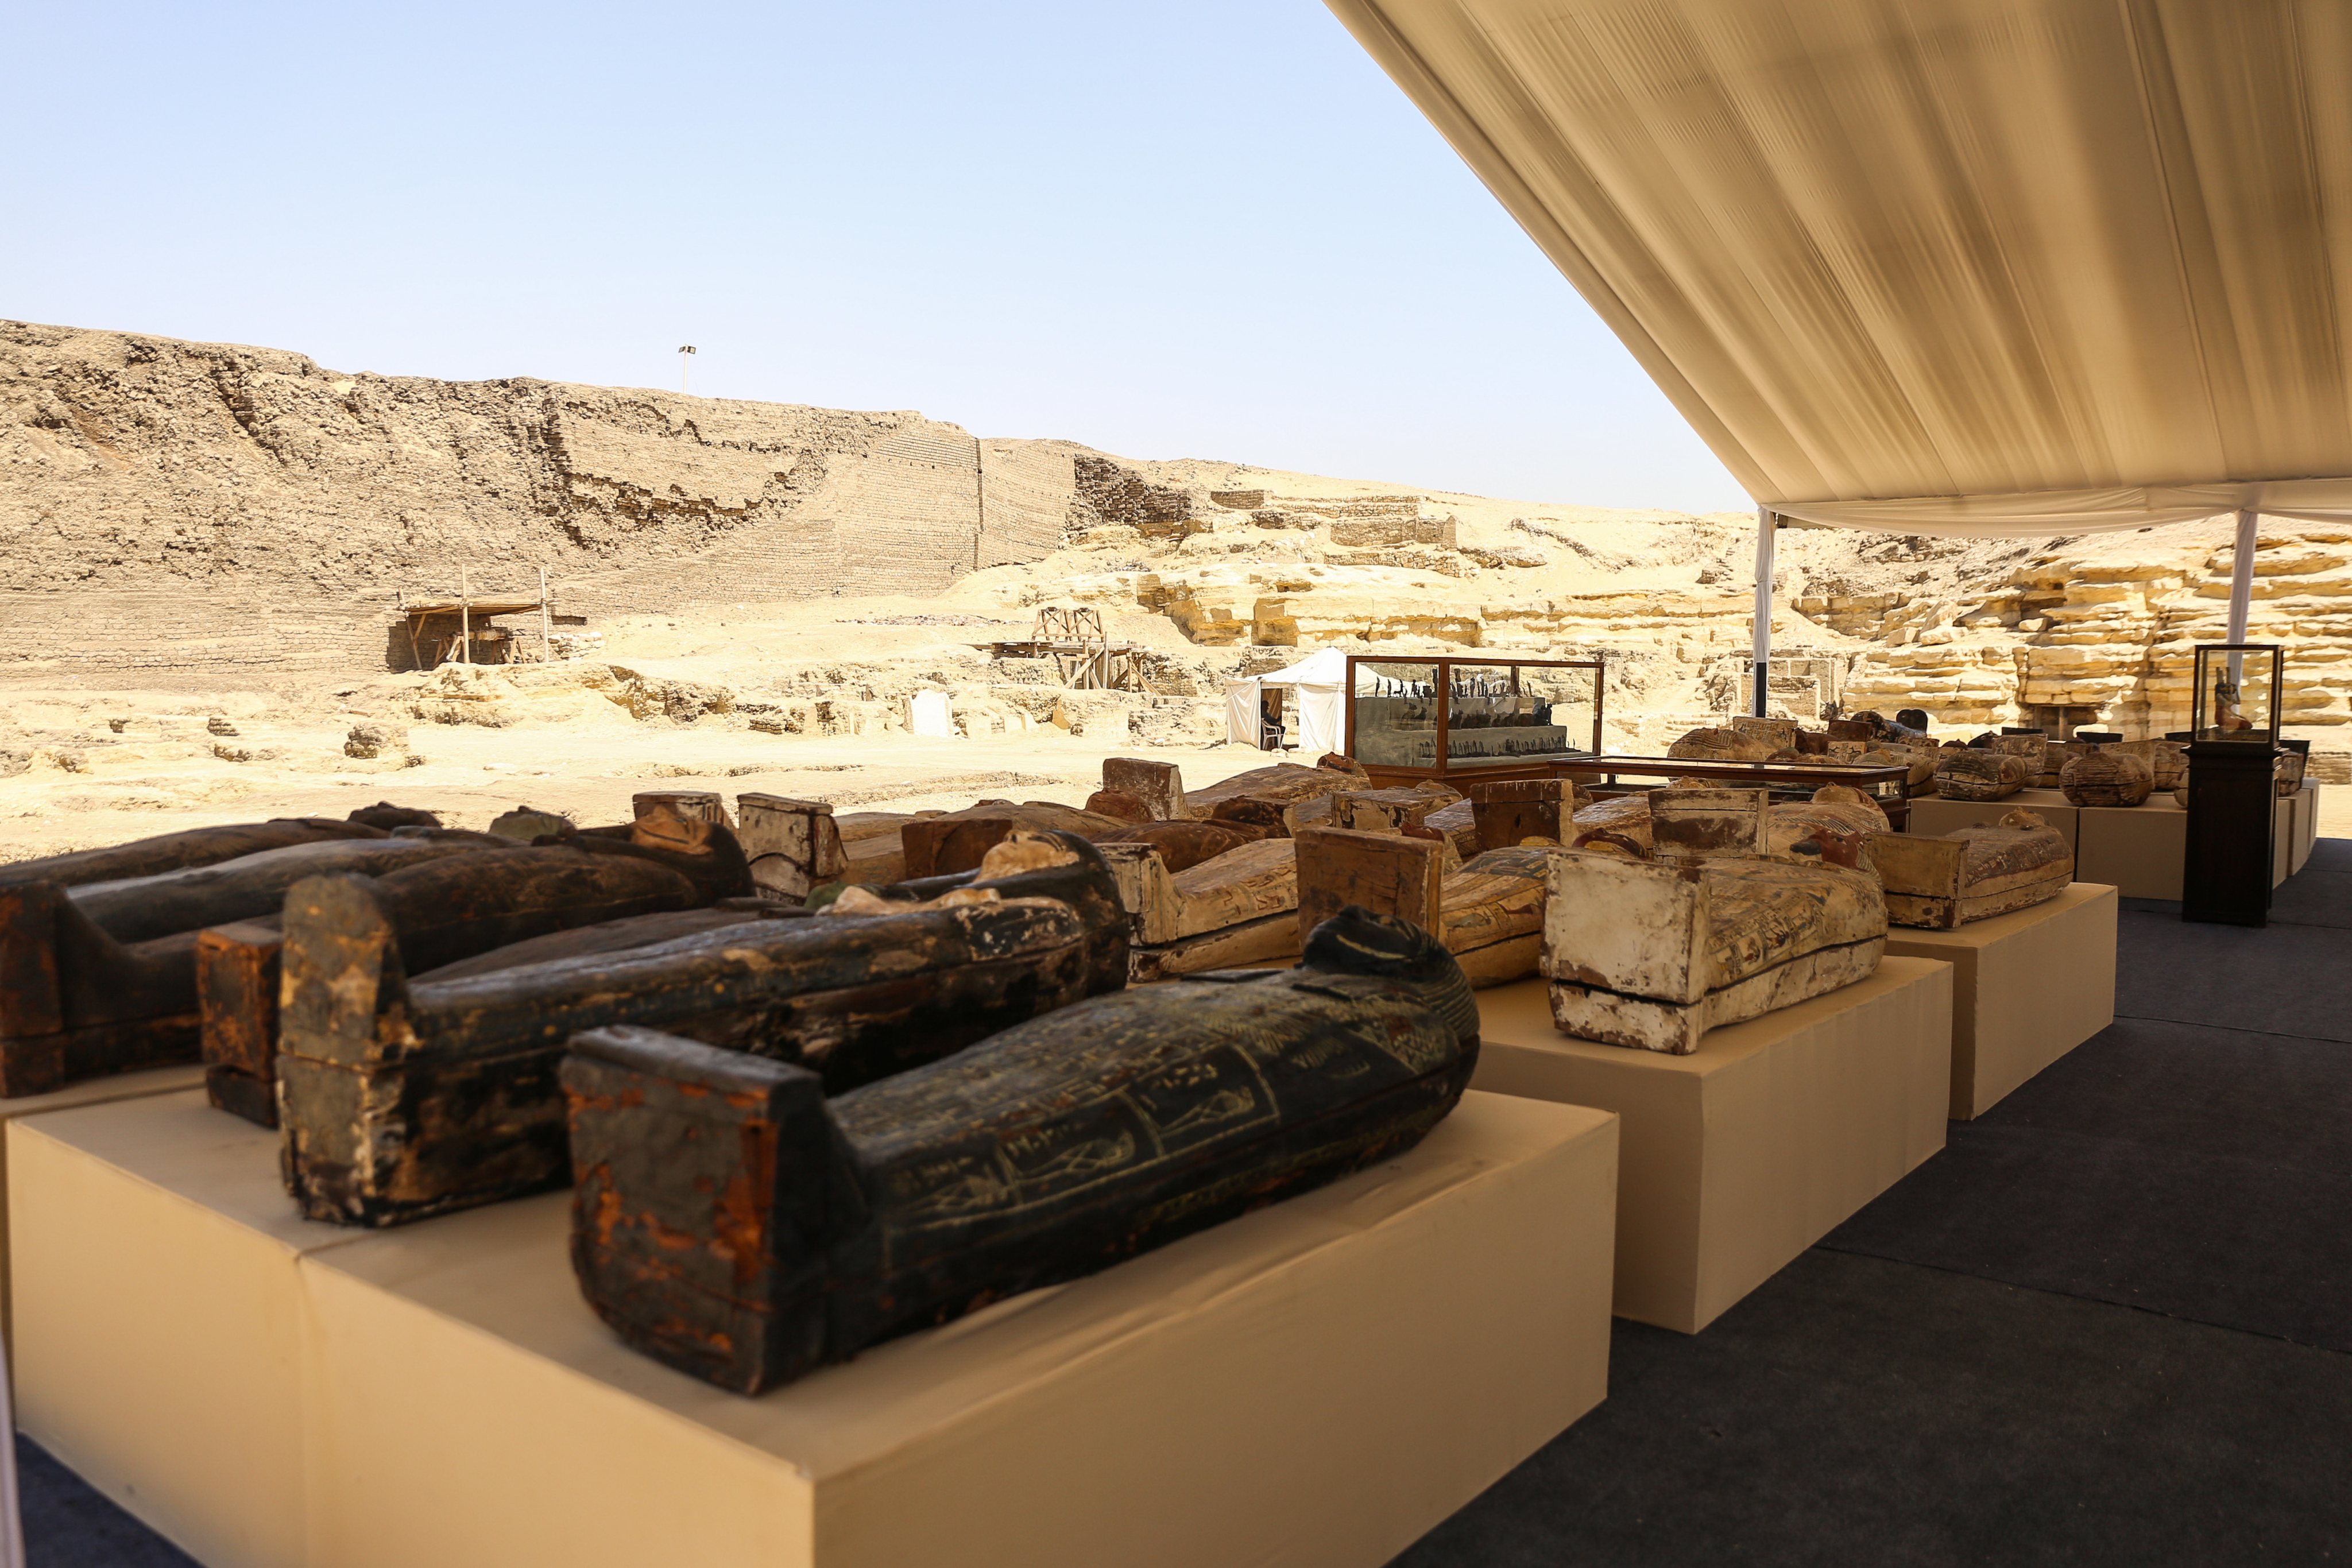 A New Archaeological Discovery In Saqqara